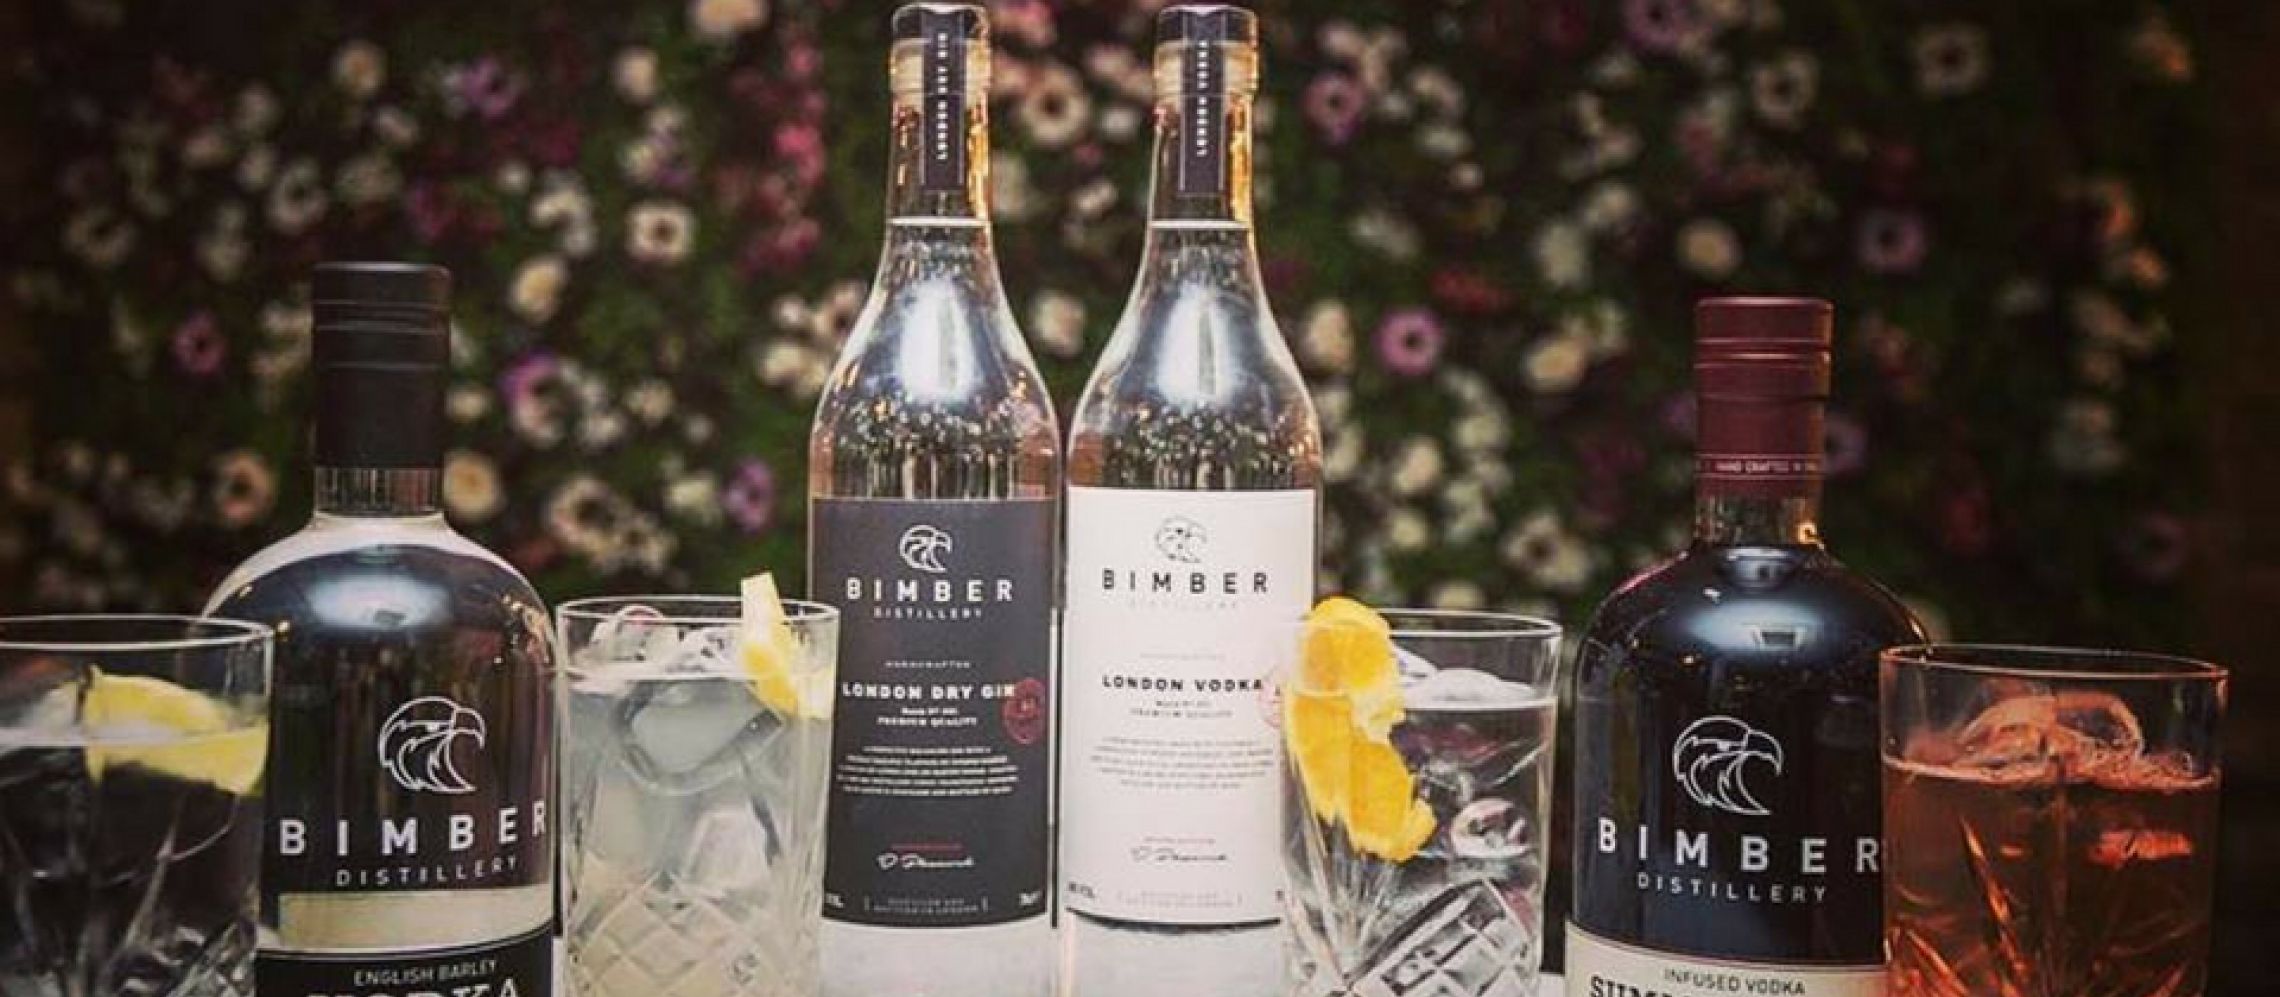 Photo for: Bimber Distillery- Inspired By Tradition